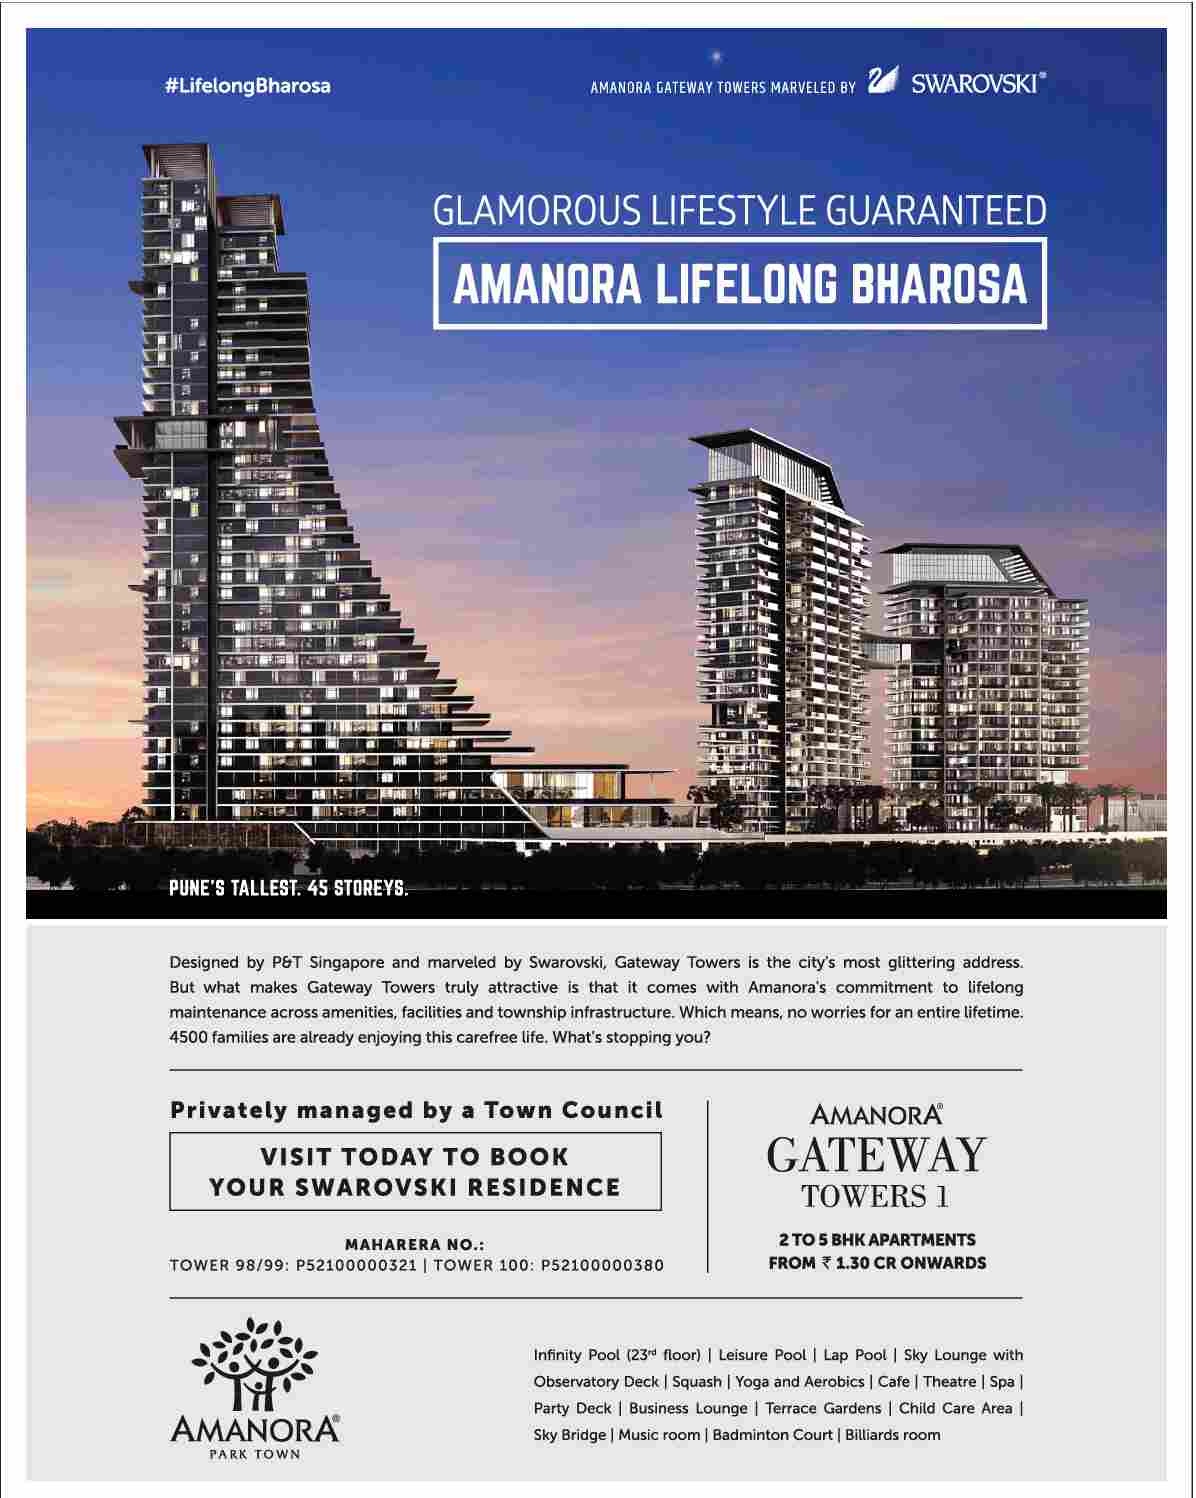 Glamorous lifestyle guaranteed for you at Amanora Gateway Towers in Pune